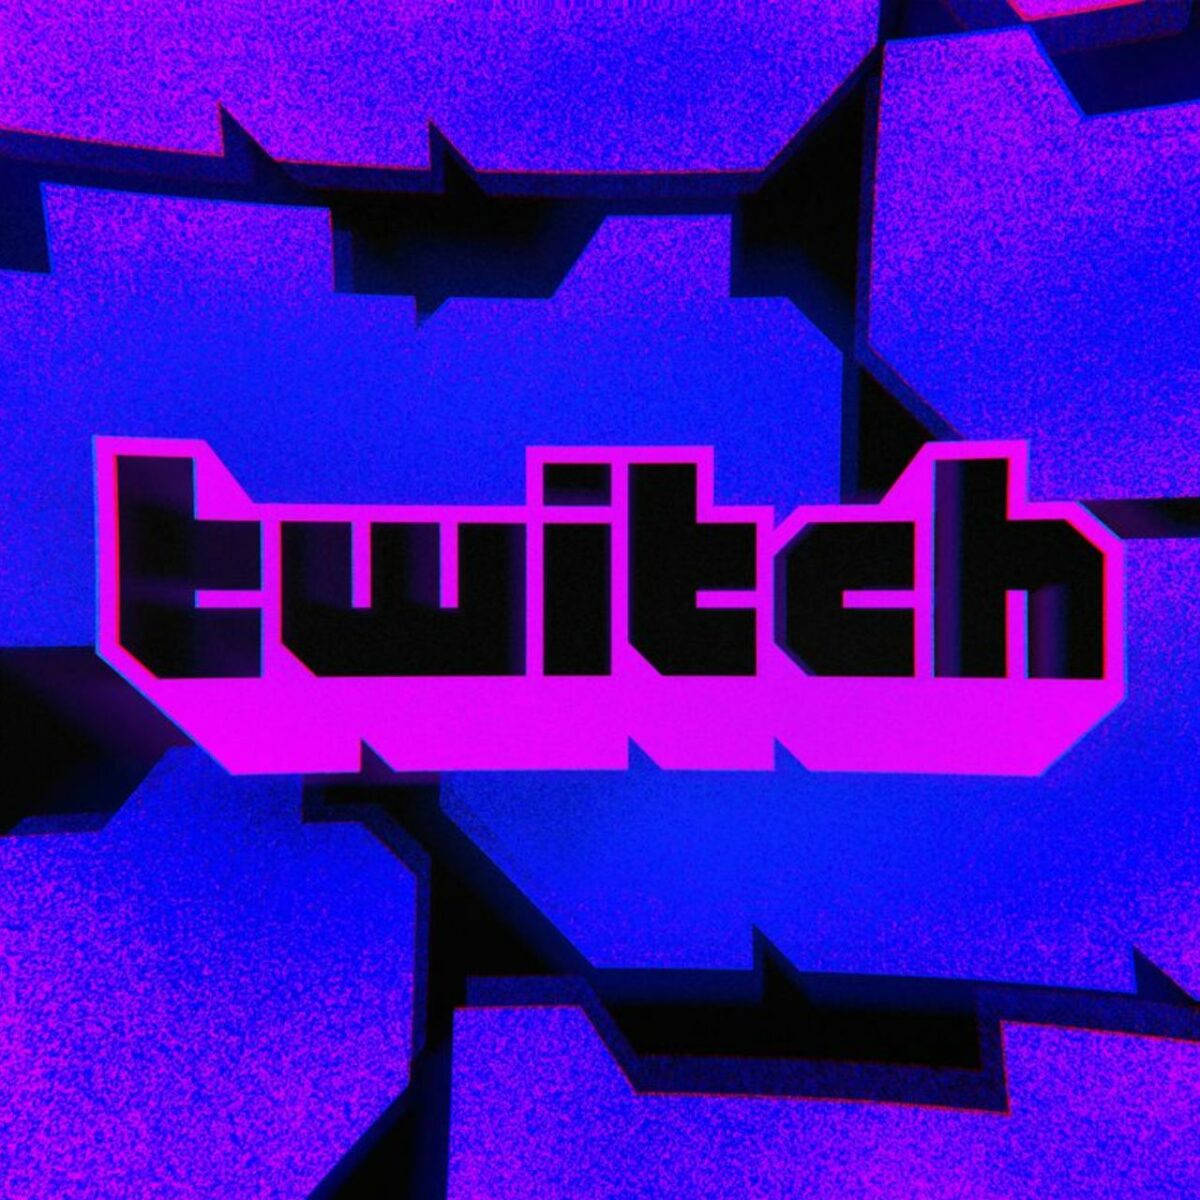 Blue And Purple Twitch 1080 Wallpaper